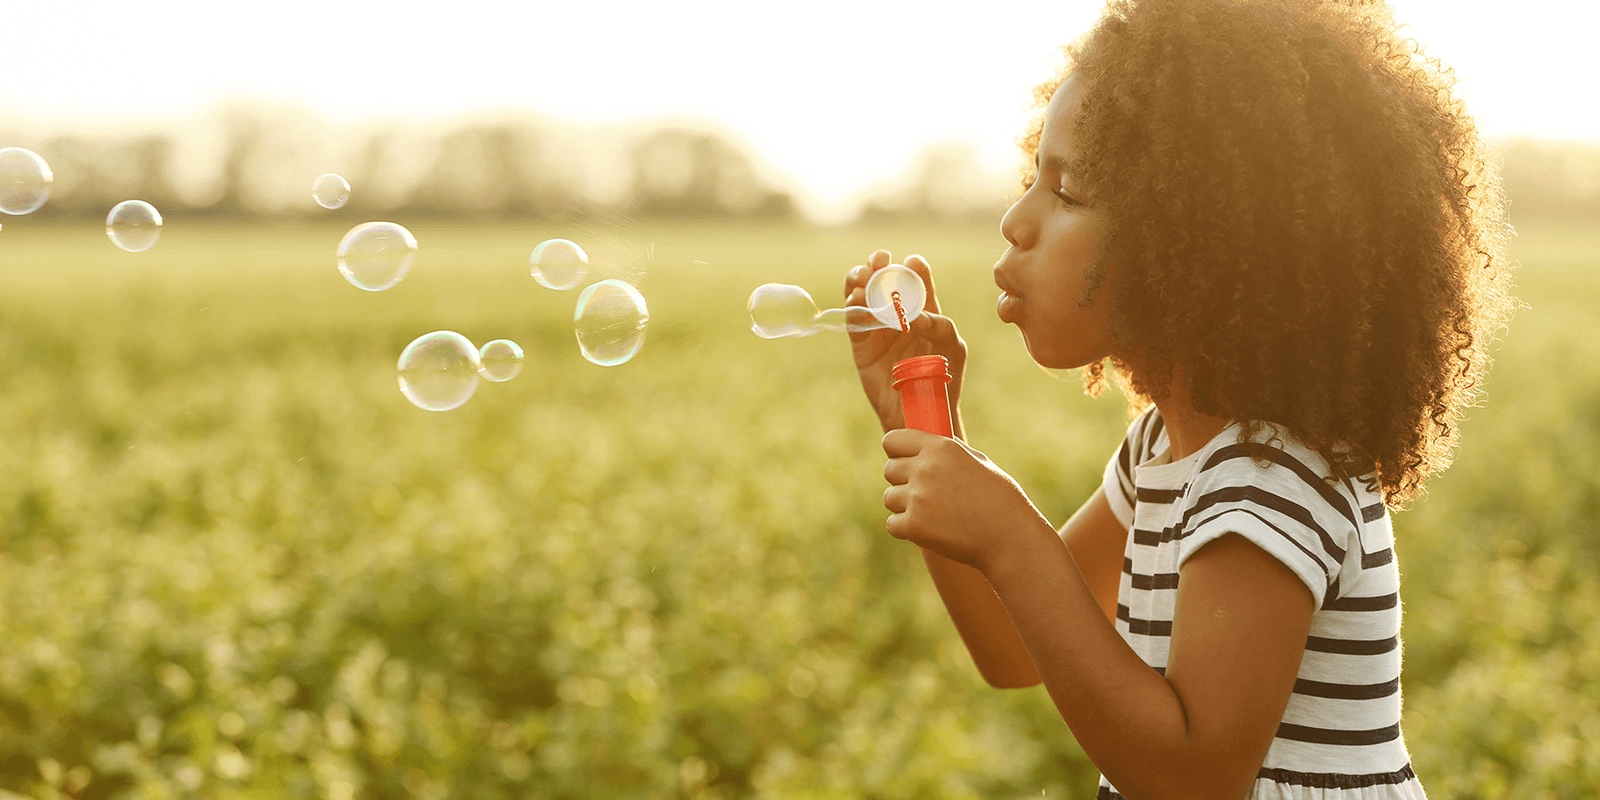 Young girls blowing bubbles in a grassy field at sunset.